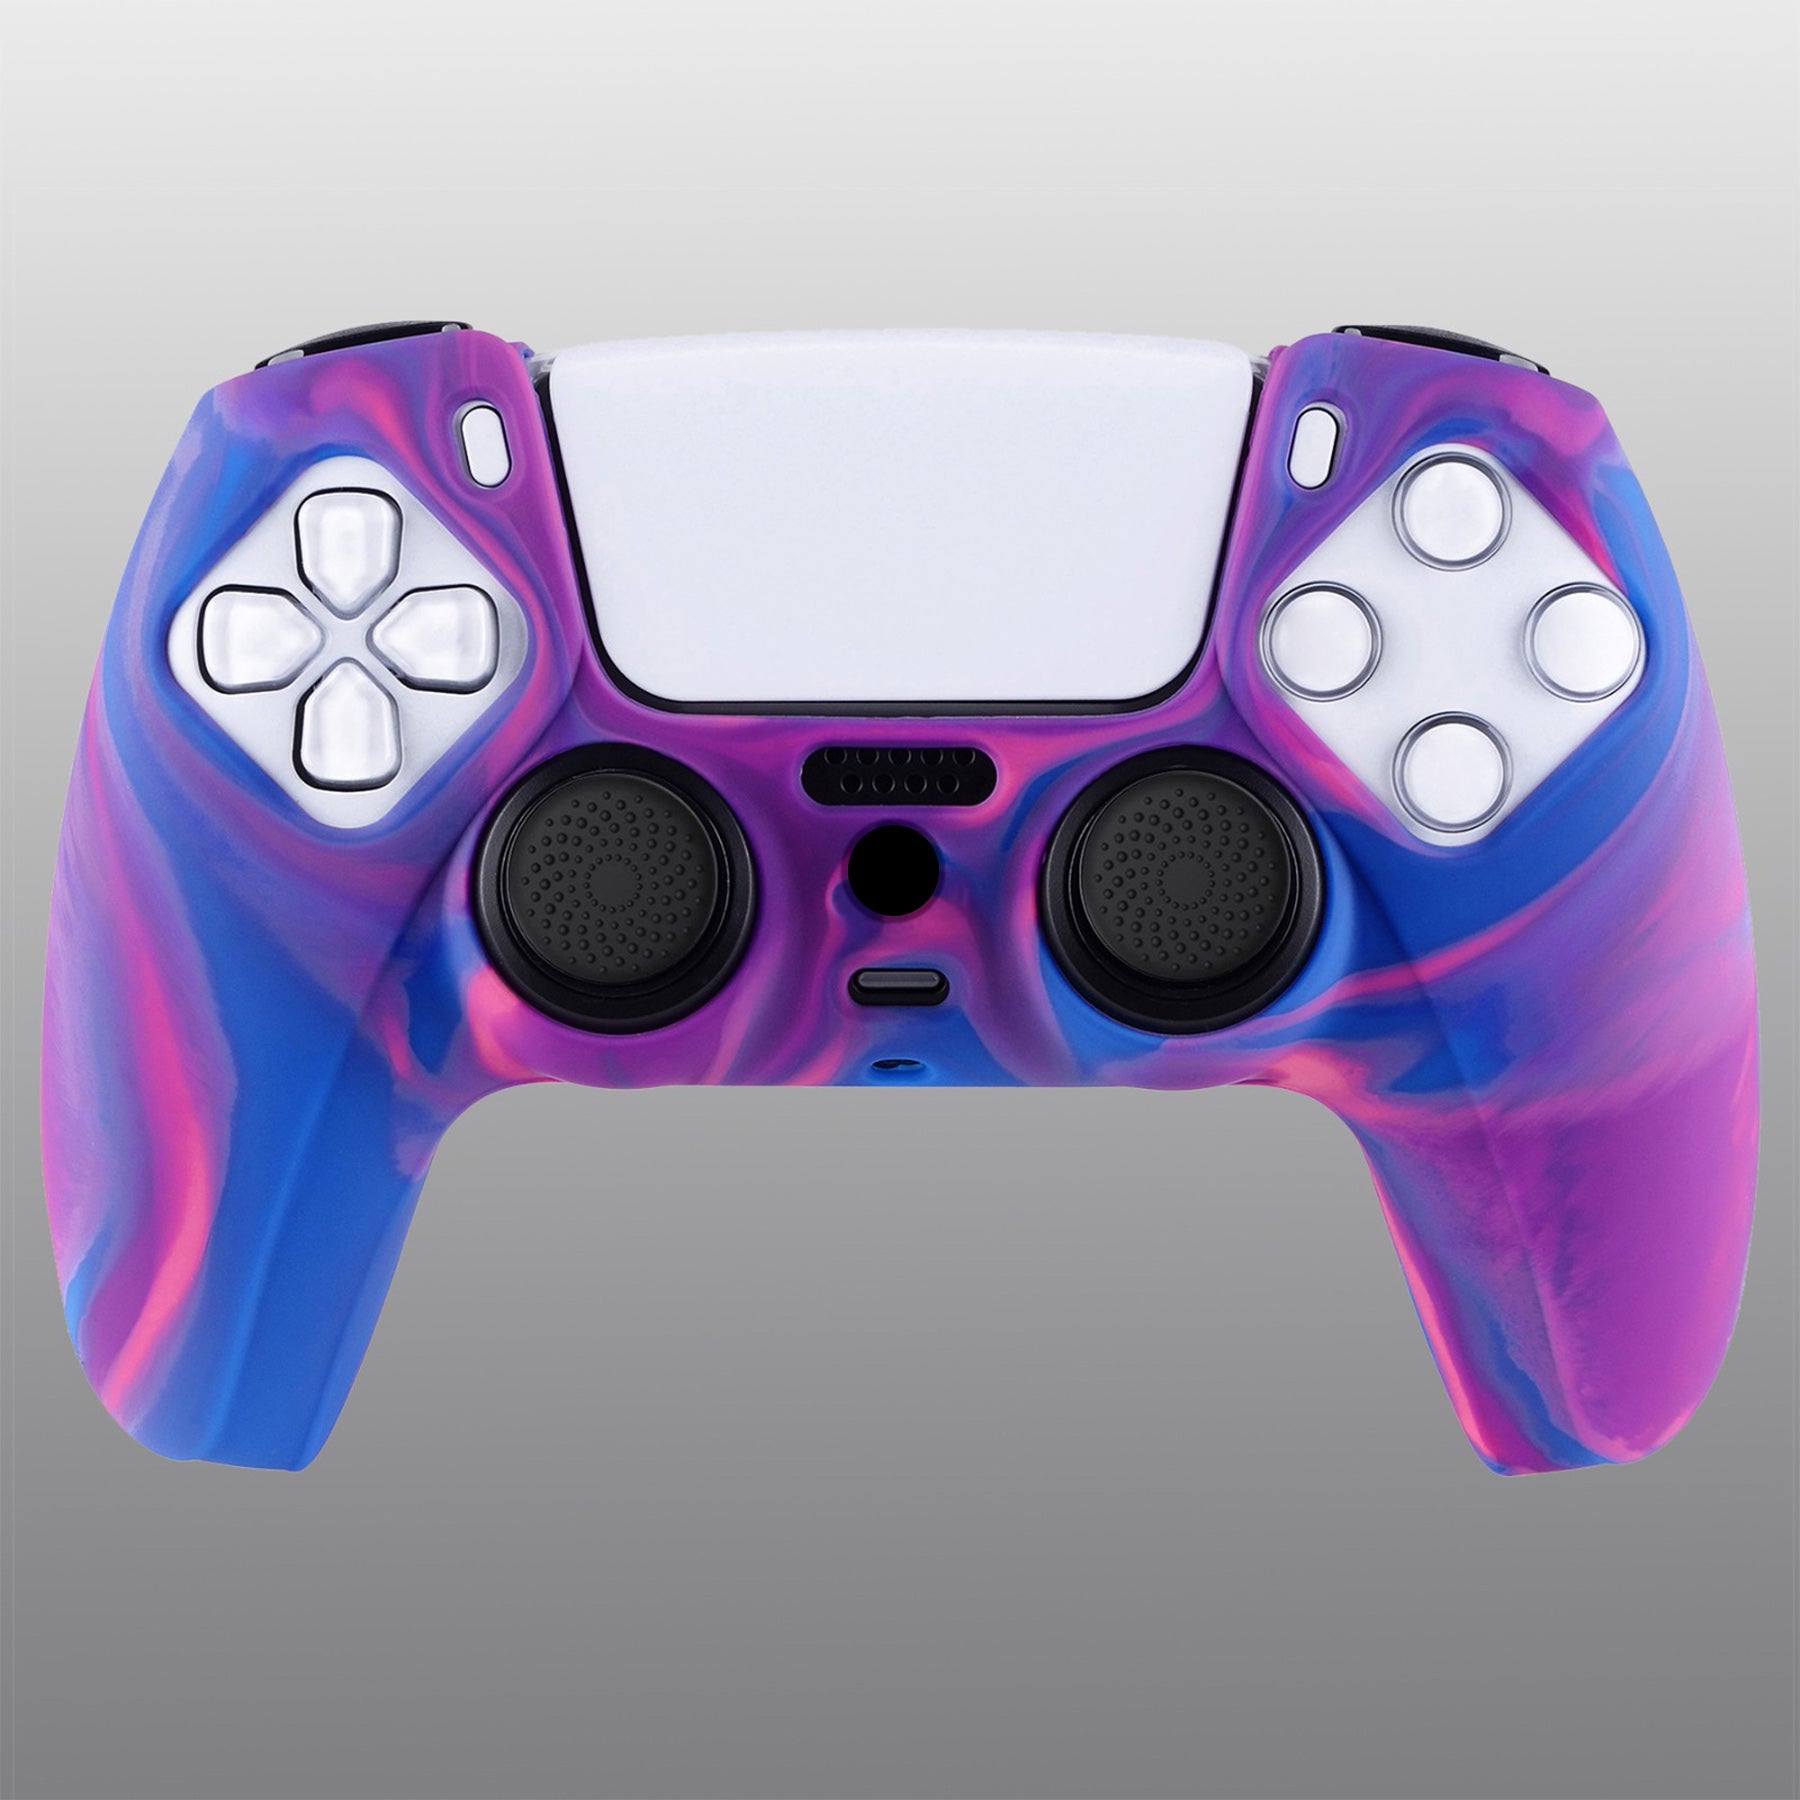 PlayVital Pure Series Anti-Slip Silicone Cover Skin with Thumb Grip Caps for PS5 Wireless Controller - Pink & Purple & Blue - KOPF015 PlayVital